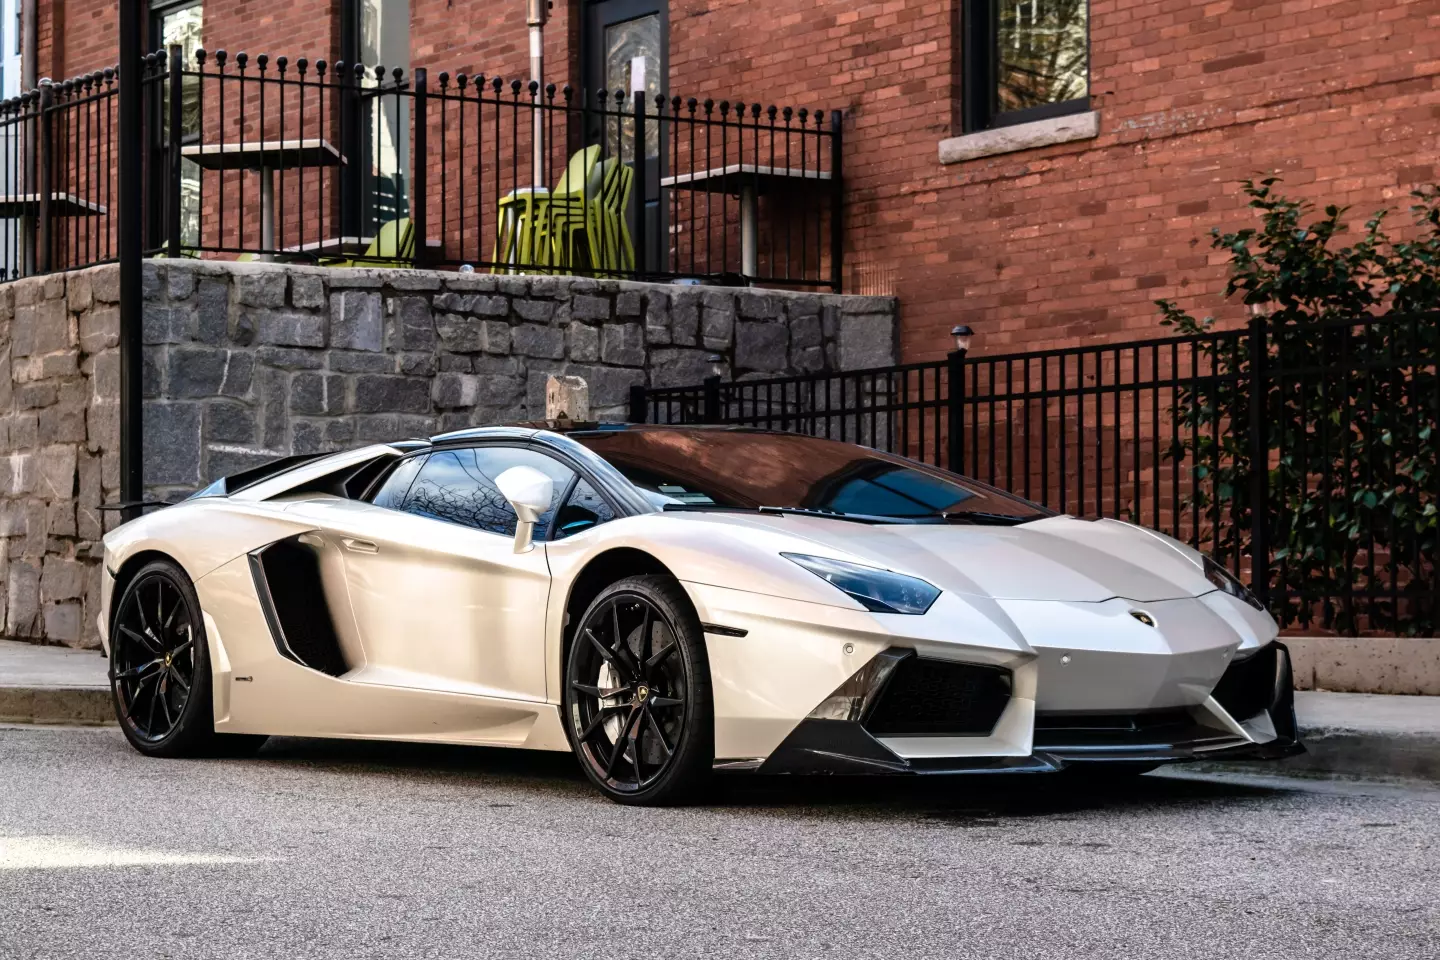 An all-electric Lambo is coming in the future.